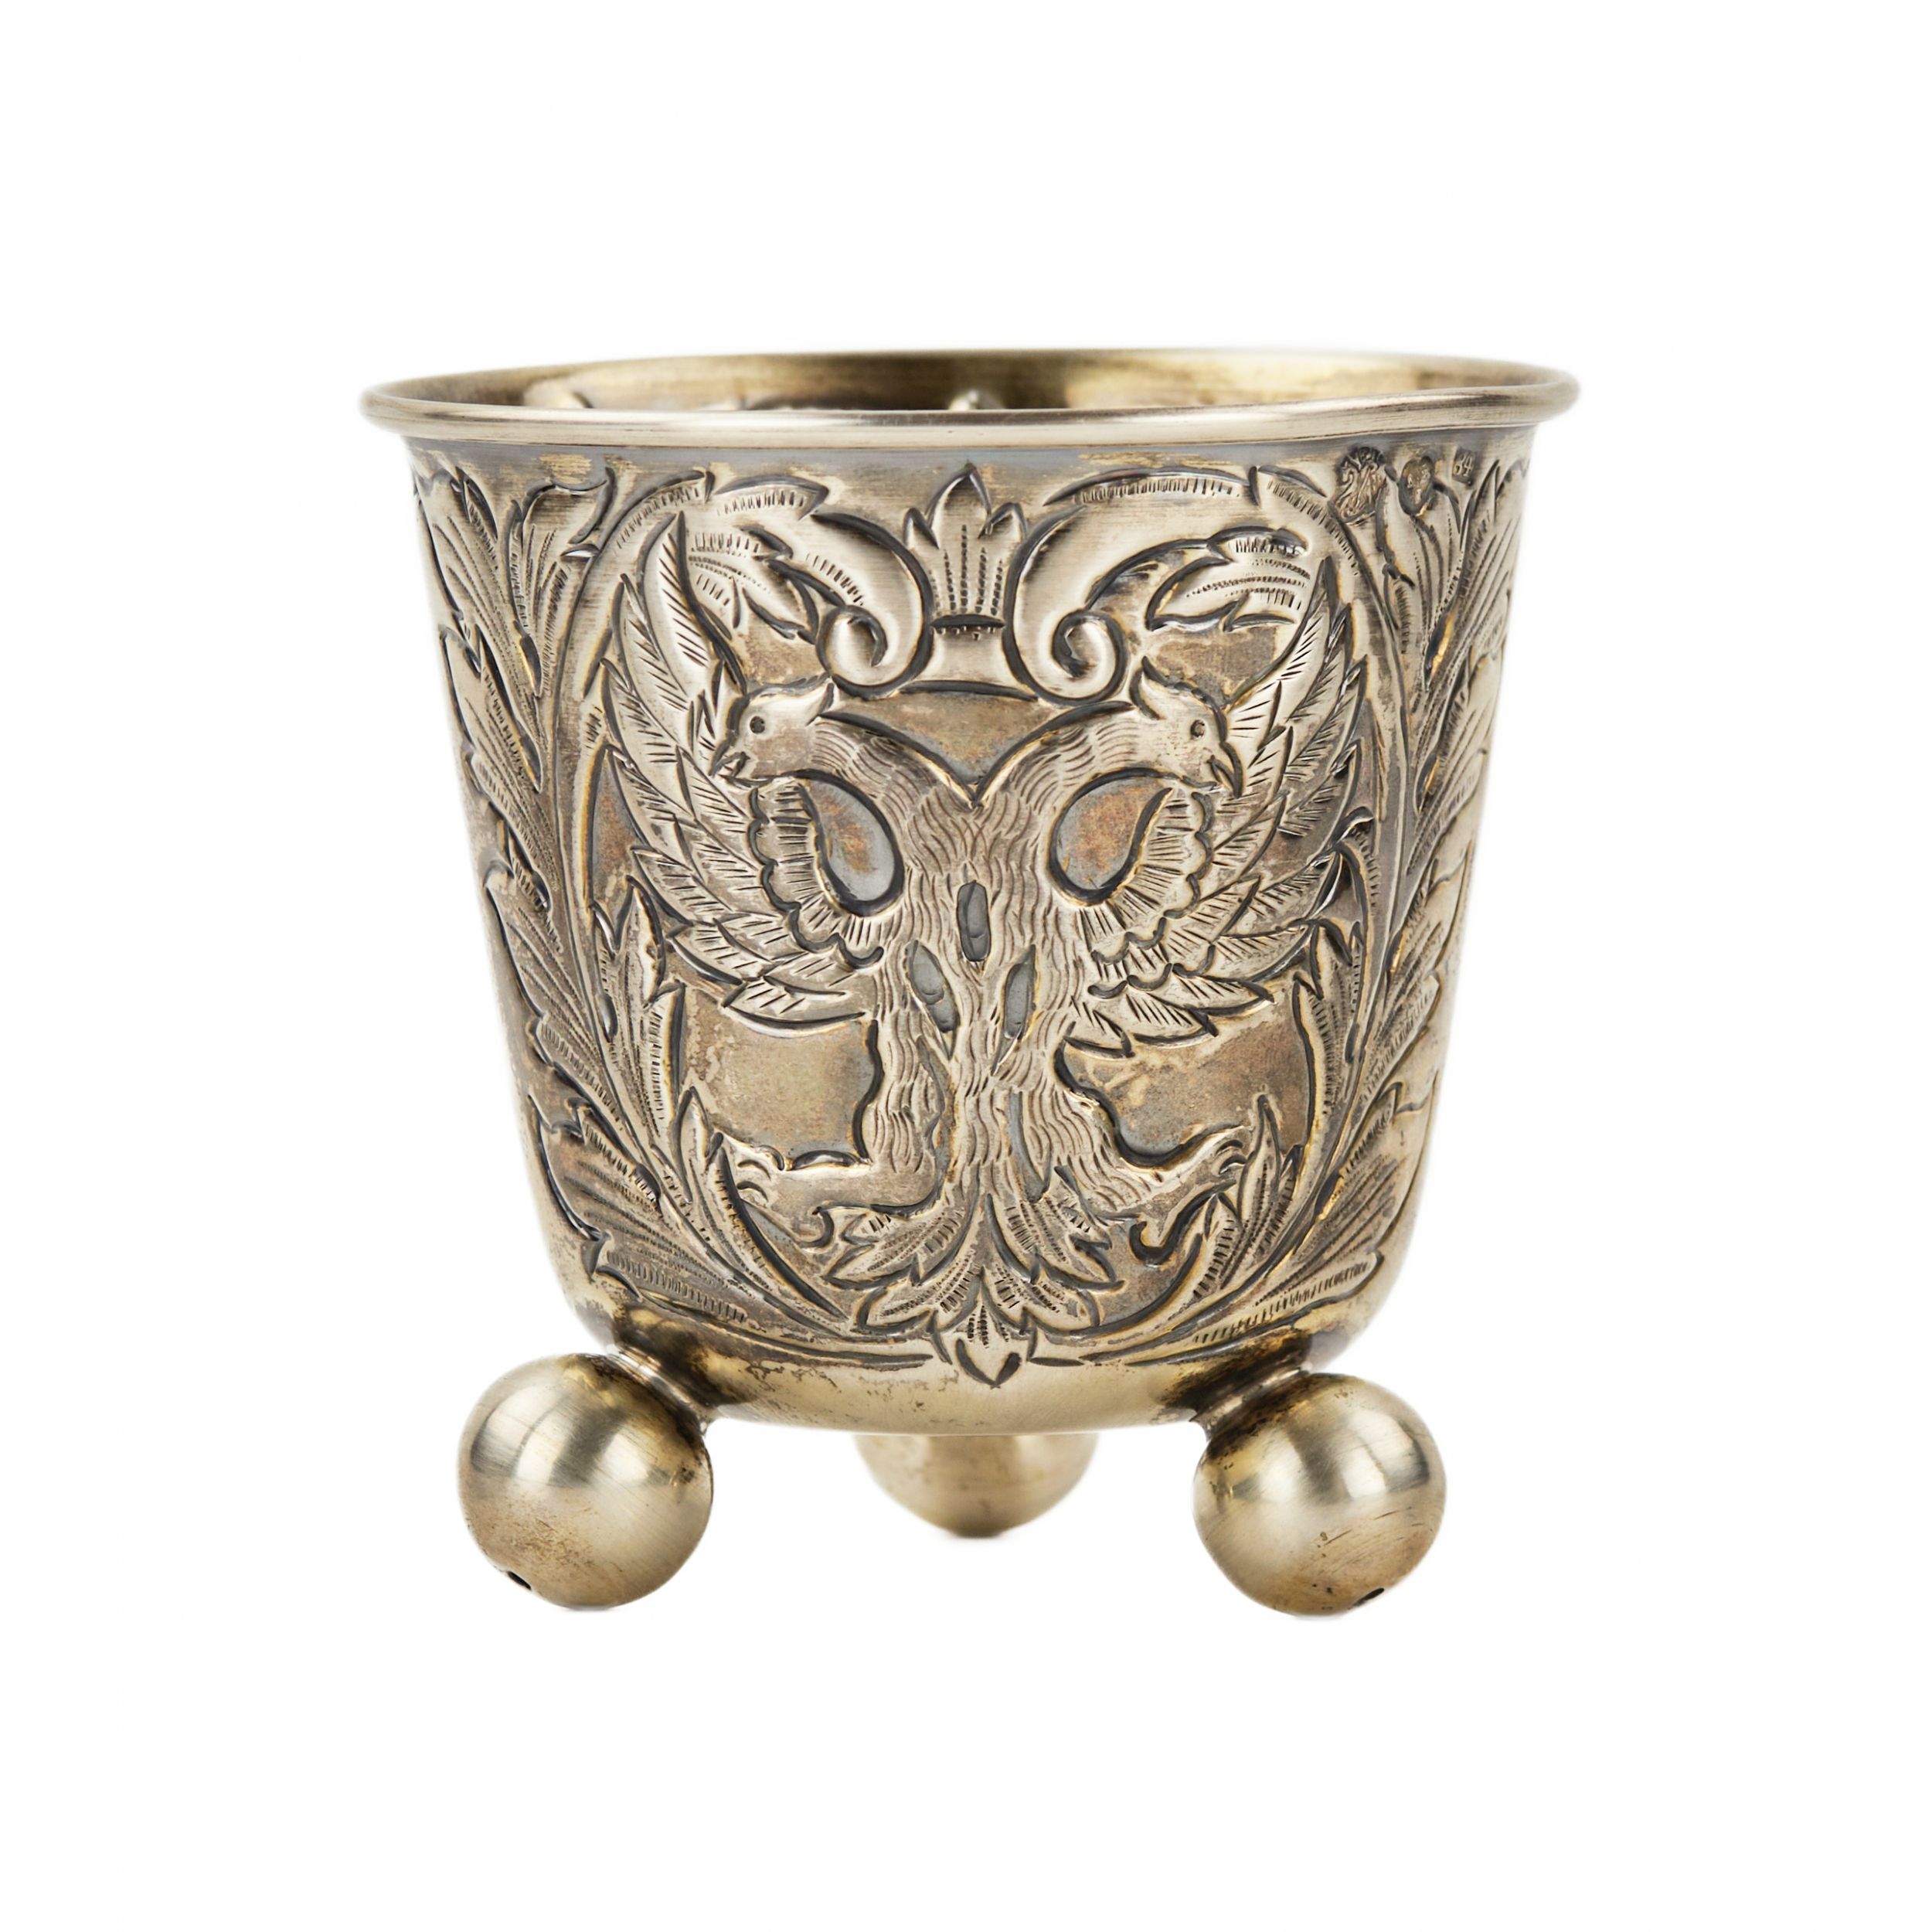 Silver-bowl-with-the-image-of-a-double-headed-eagle-Moscow-Russian-Empire